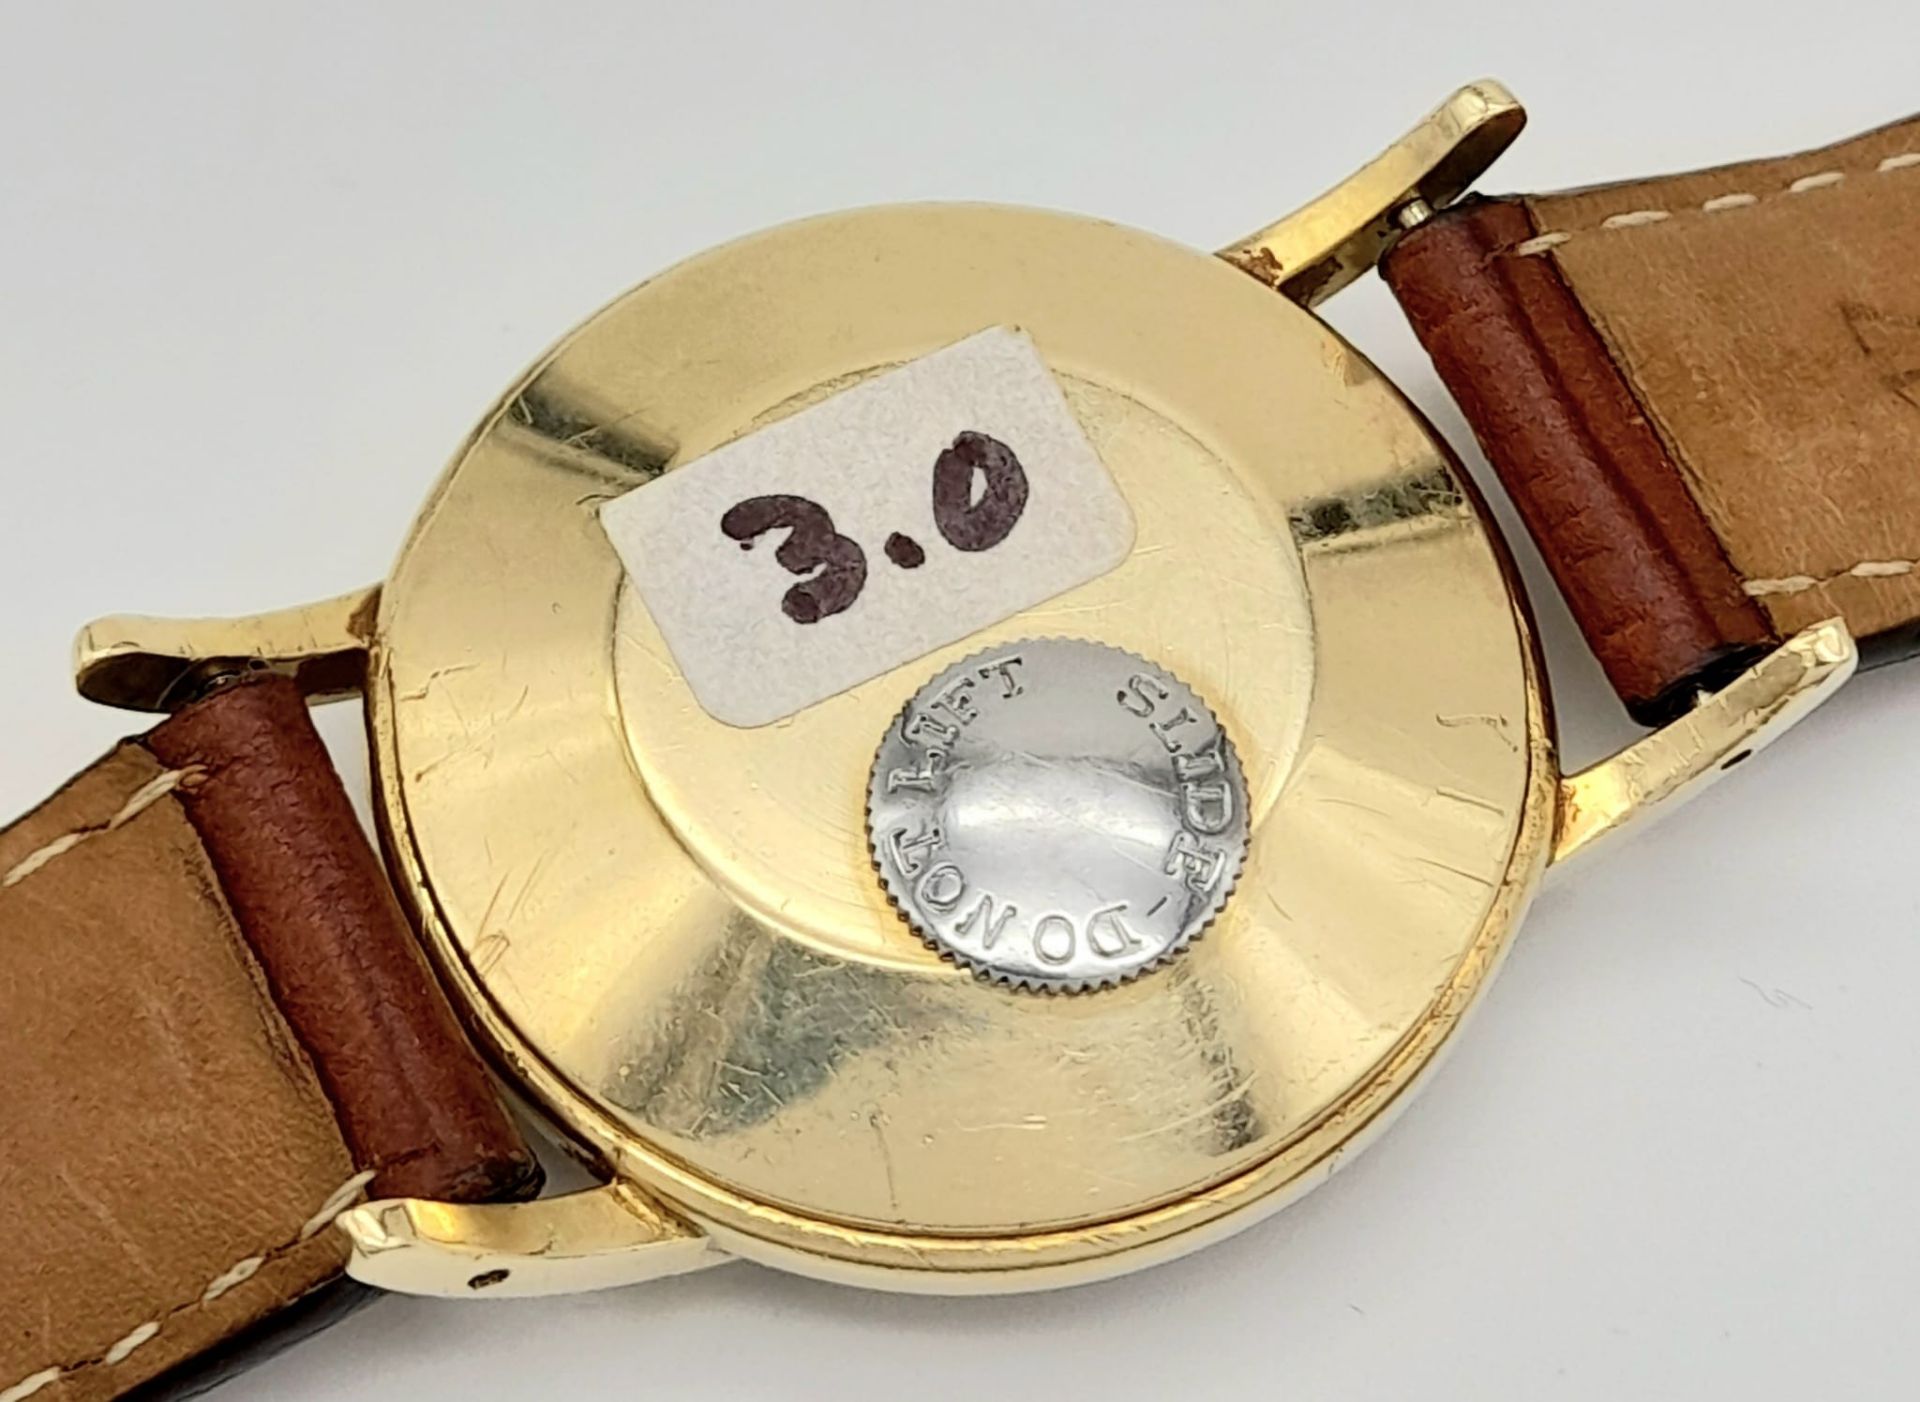 A Vintage Jaeger Le Coultre Futurematic Gents Watch.Brown leather strap. Case - 35mm. White dial - Image 7 of 7